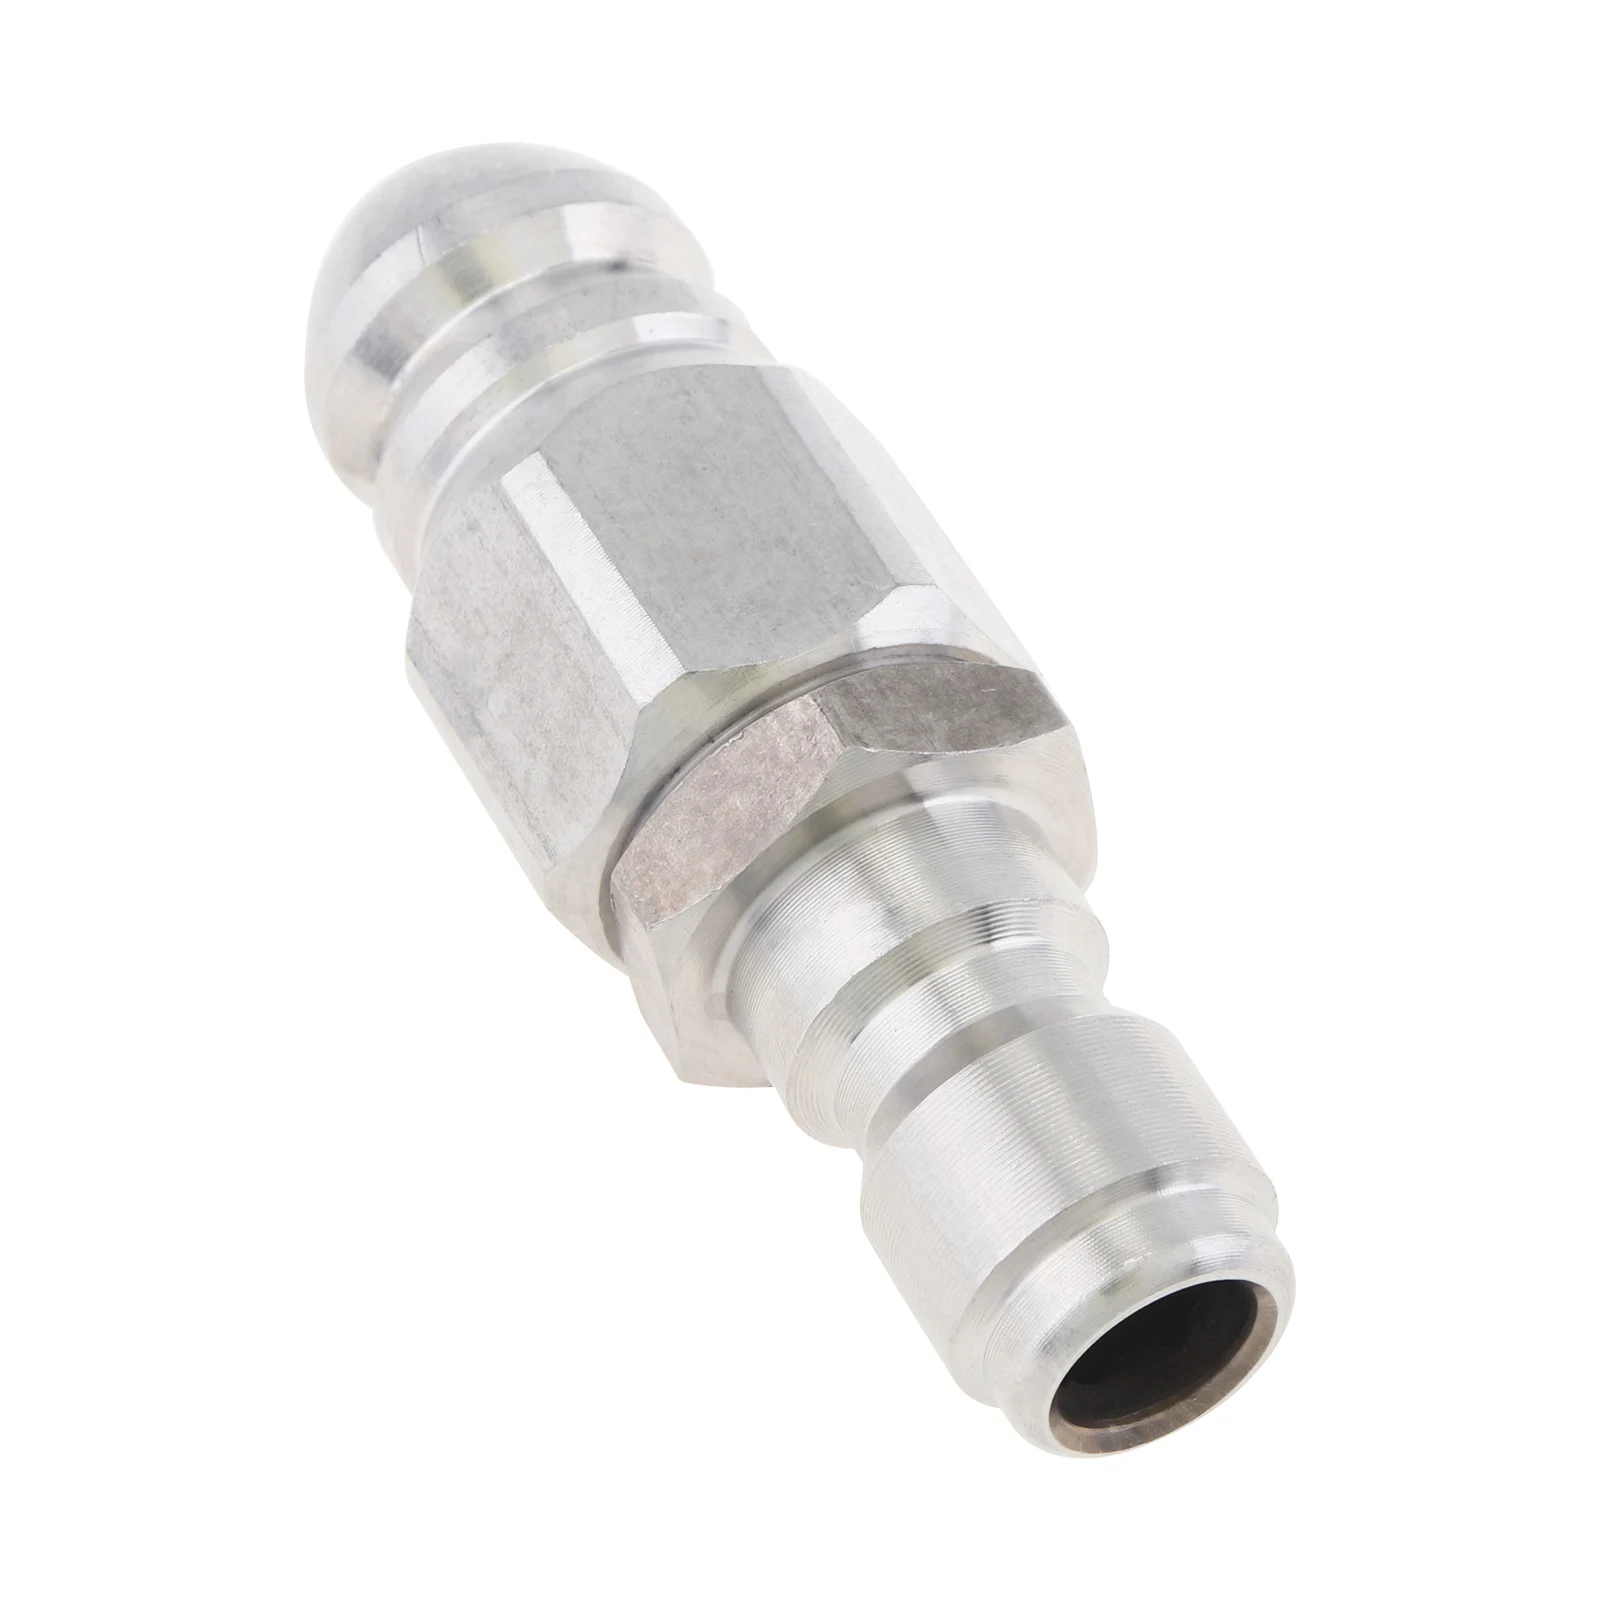 Pressure Washer Sewer Jetter Nozzle Mini Compact Quickly Connector for Drain Jetting Hose, Pressure Drain Jetter Hose Nozzle 2 4ghz 5 8ghz dual band wifi antenna 3dbi rp sma sma connector rubber aeria for mini pci card camera usb adapter network router